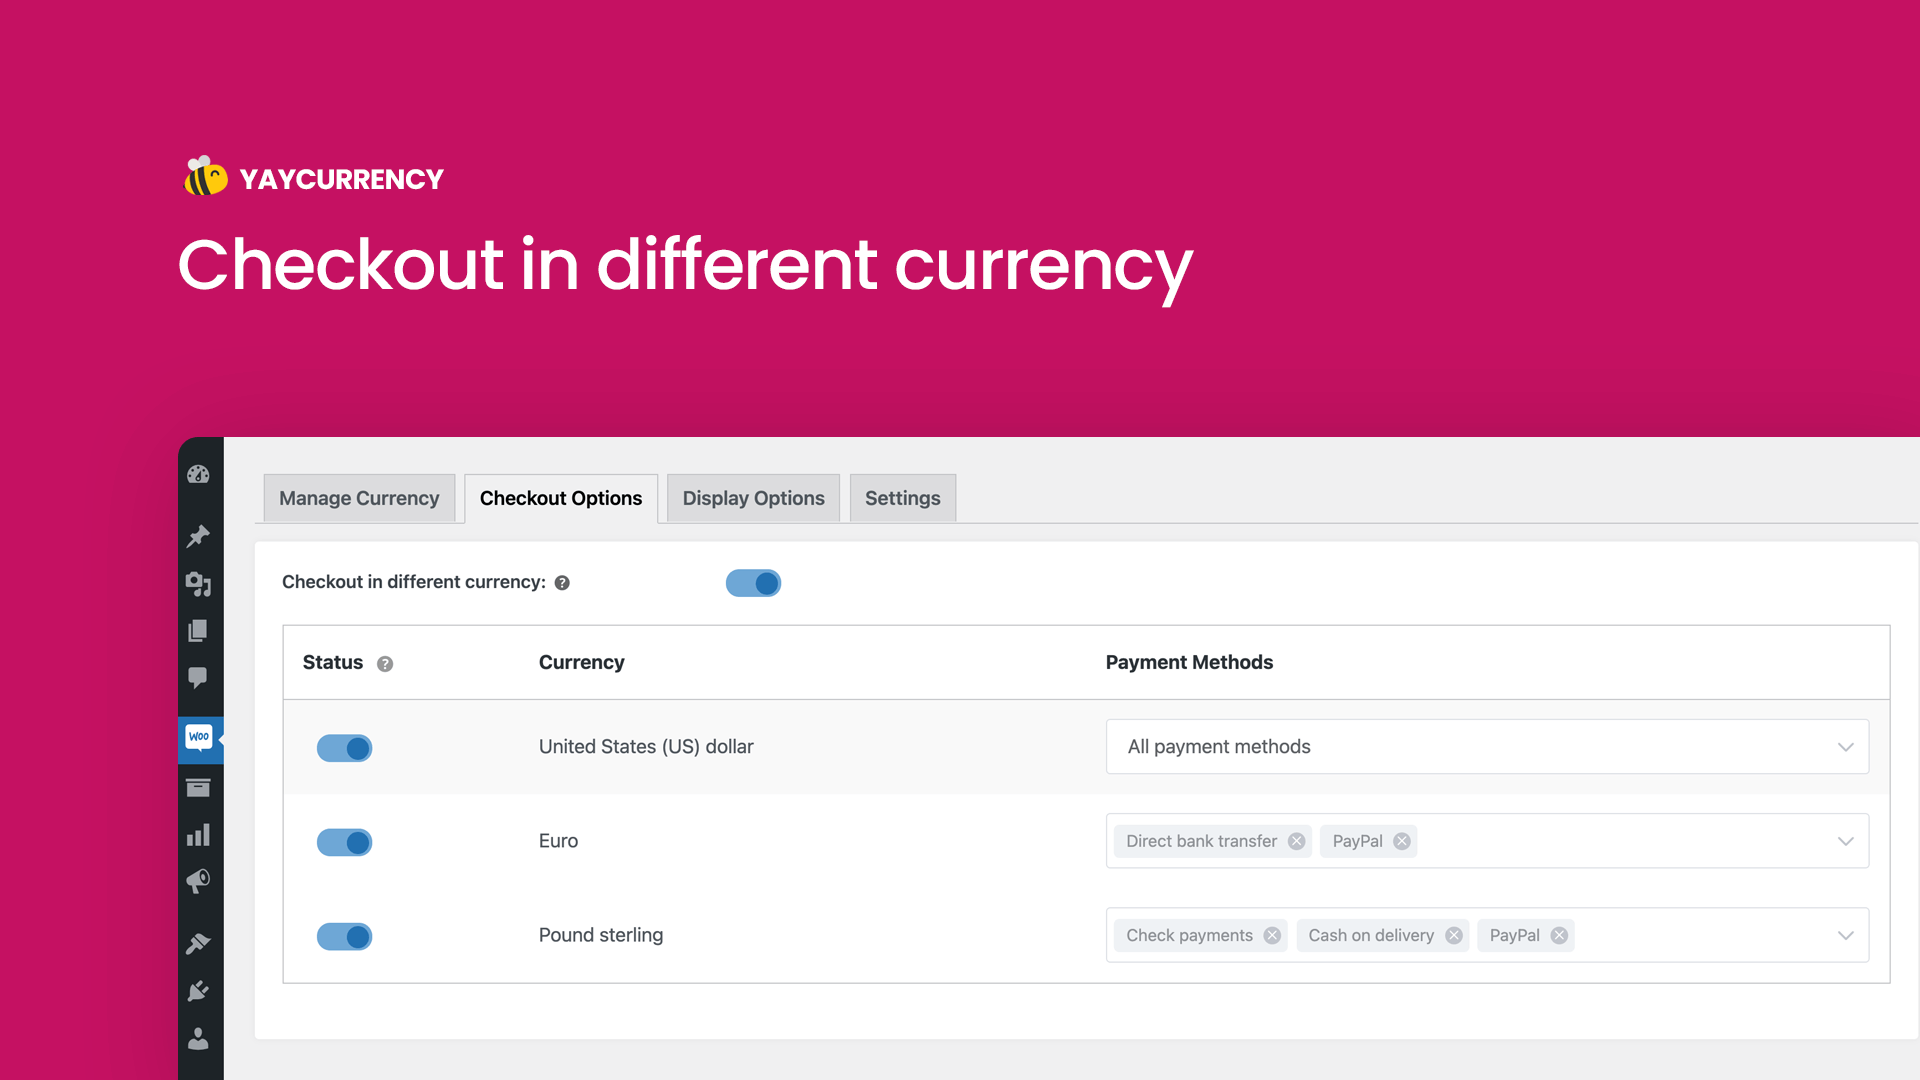 Allow checkout in local currency based on payment methods